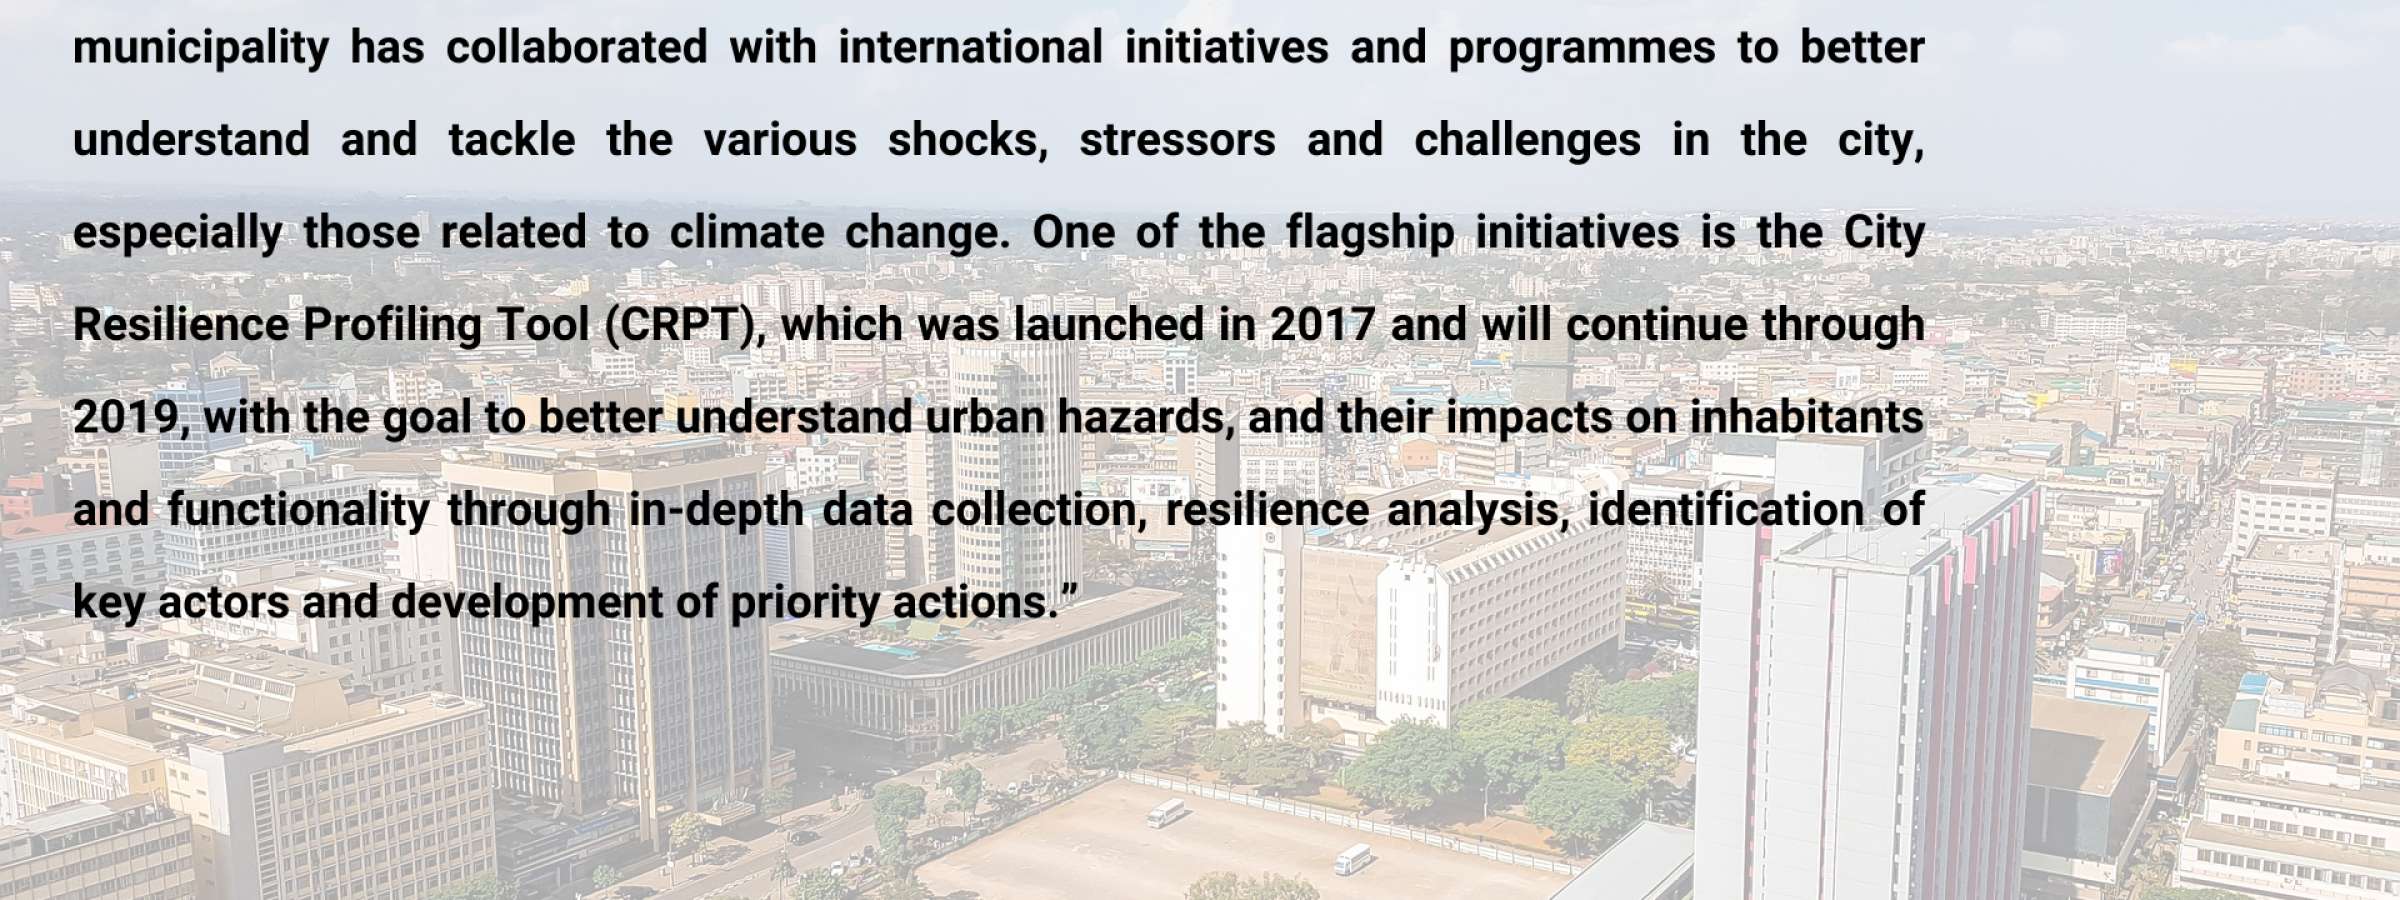 In 2010, the World Bank and the National Disaster Management Institute identified Maputo Municipality as one of the most risk prone in Mozambique.